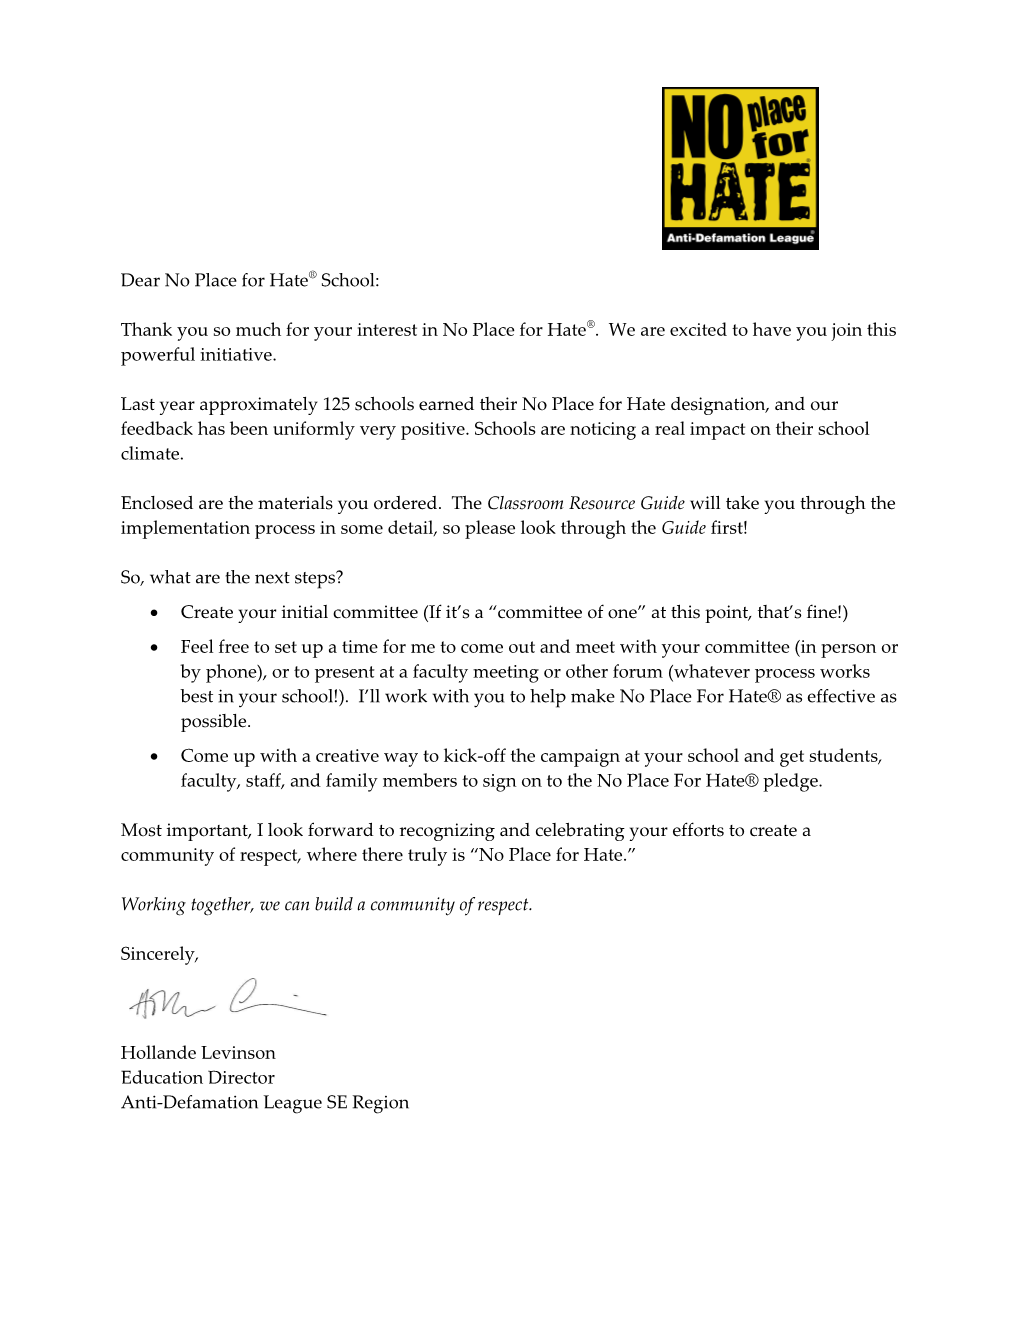 Dear No Place for Hate School